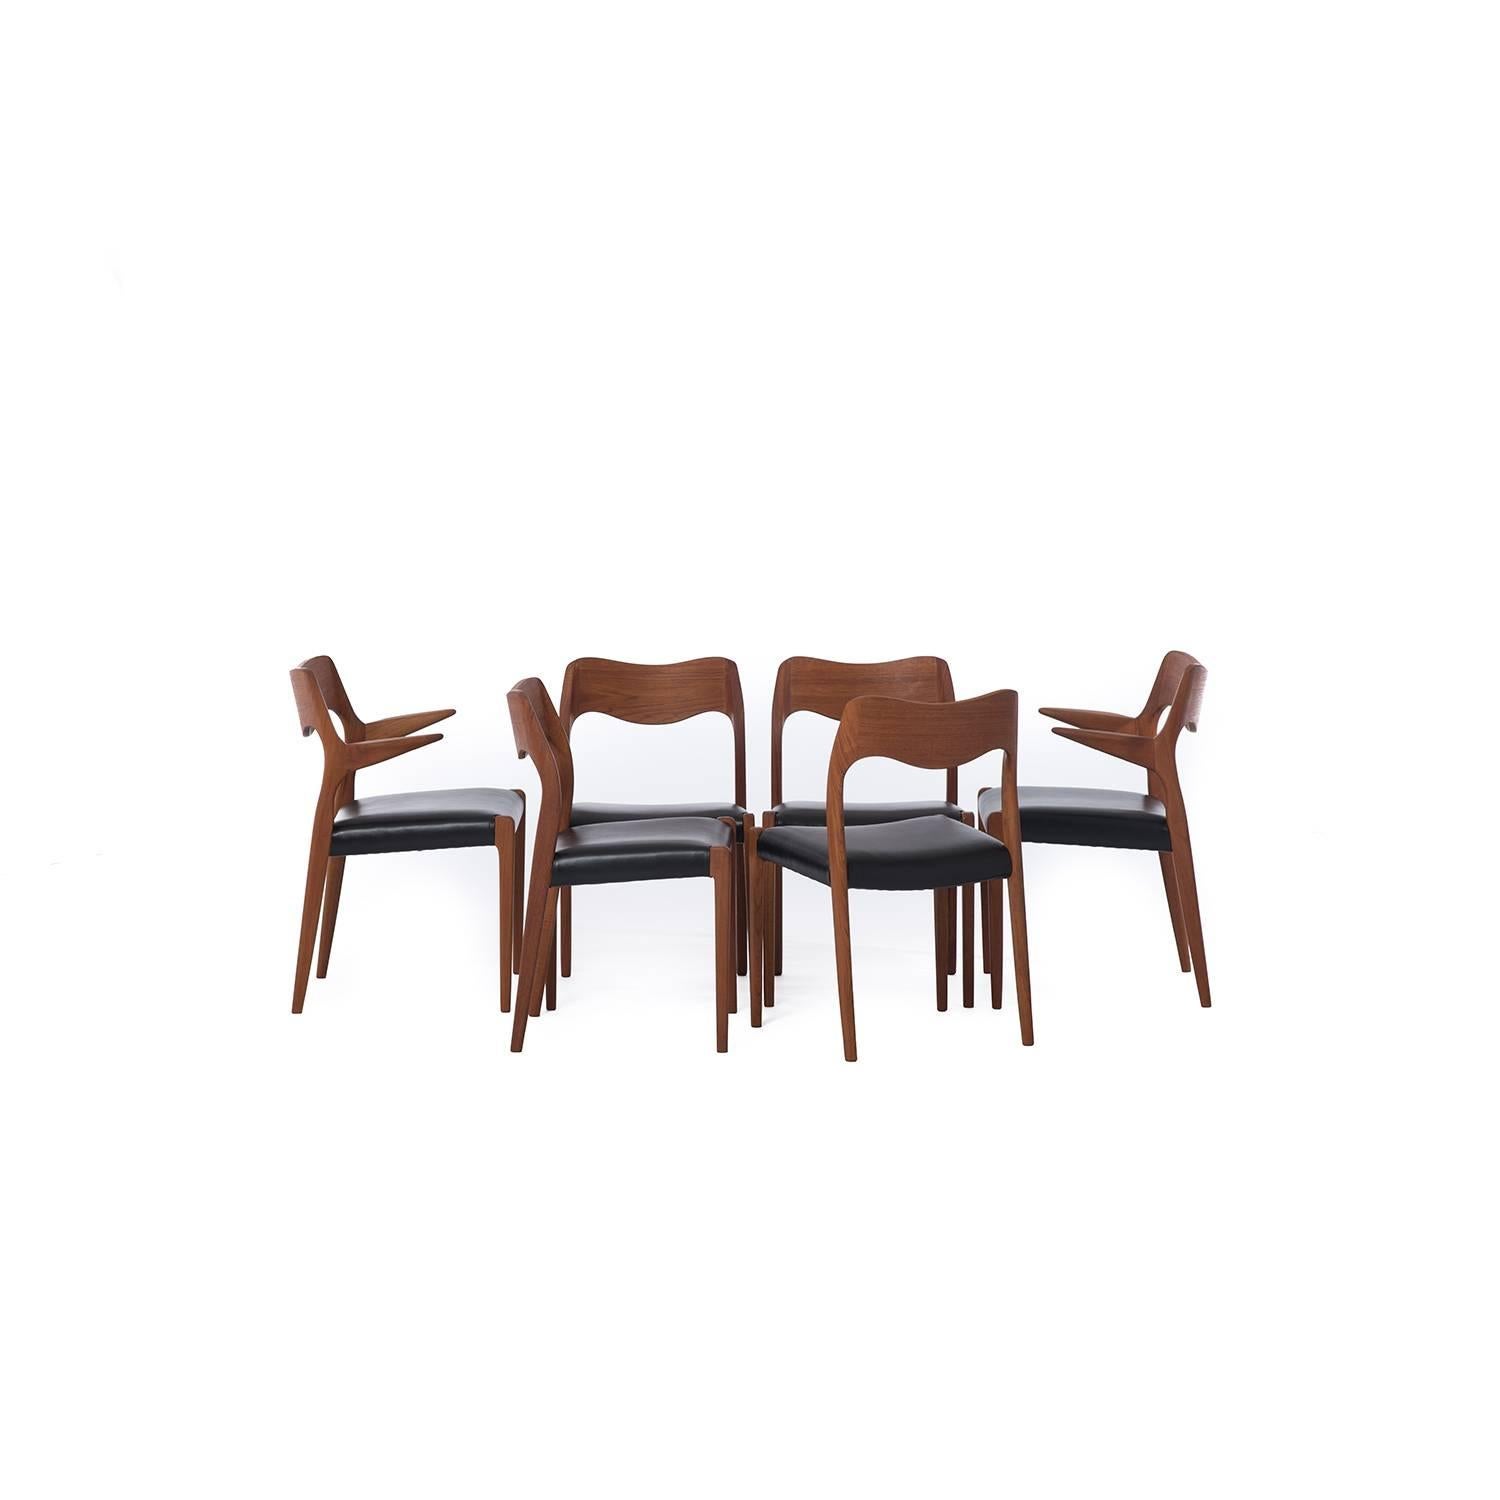 Striking set of Niels Otto Møeller dining chairs in teak. Four side chairs, two captains chairs, sold as a set of six. Newly upholstered in buttery black leather.